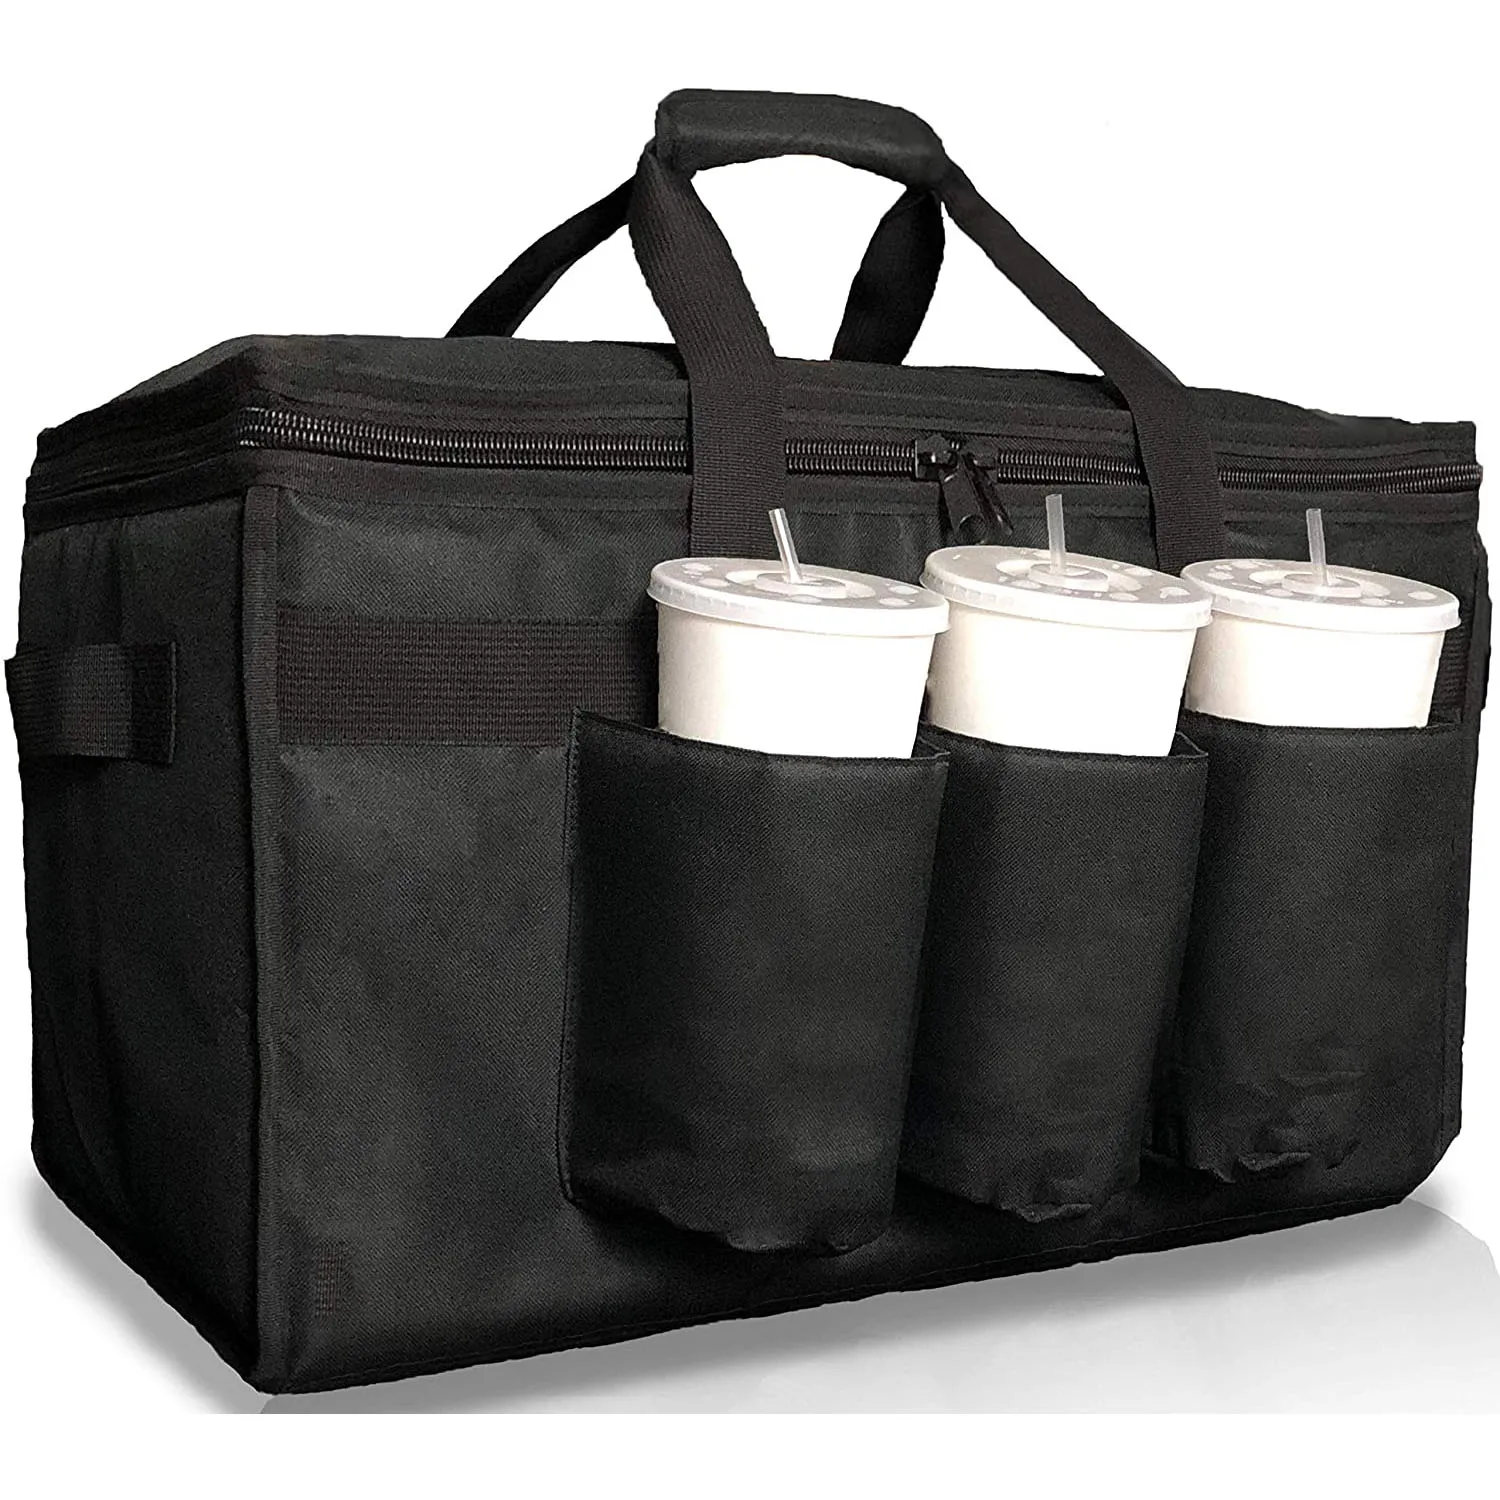 

T-DB-A010 Insulated Food Delivery Bag with Cup Holders Drink Carriers Premium Great for Beverages Grocery Catering DoorDash, Customized color